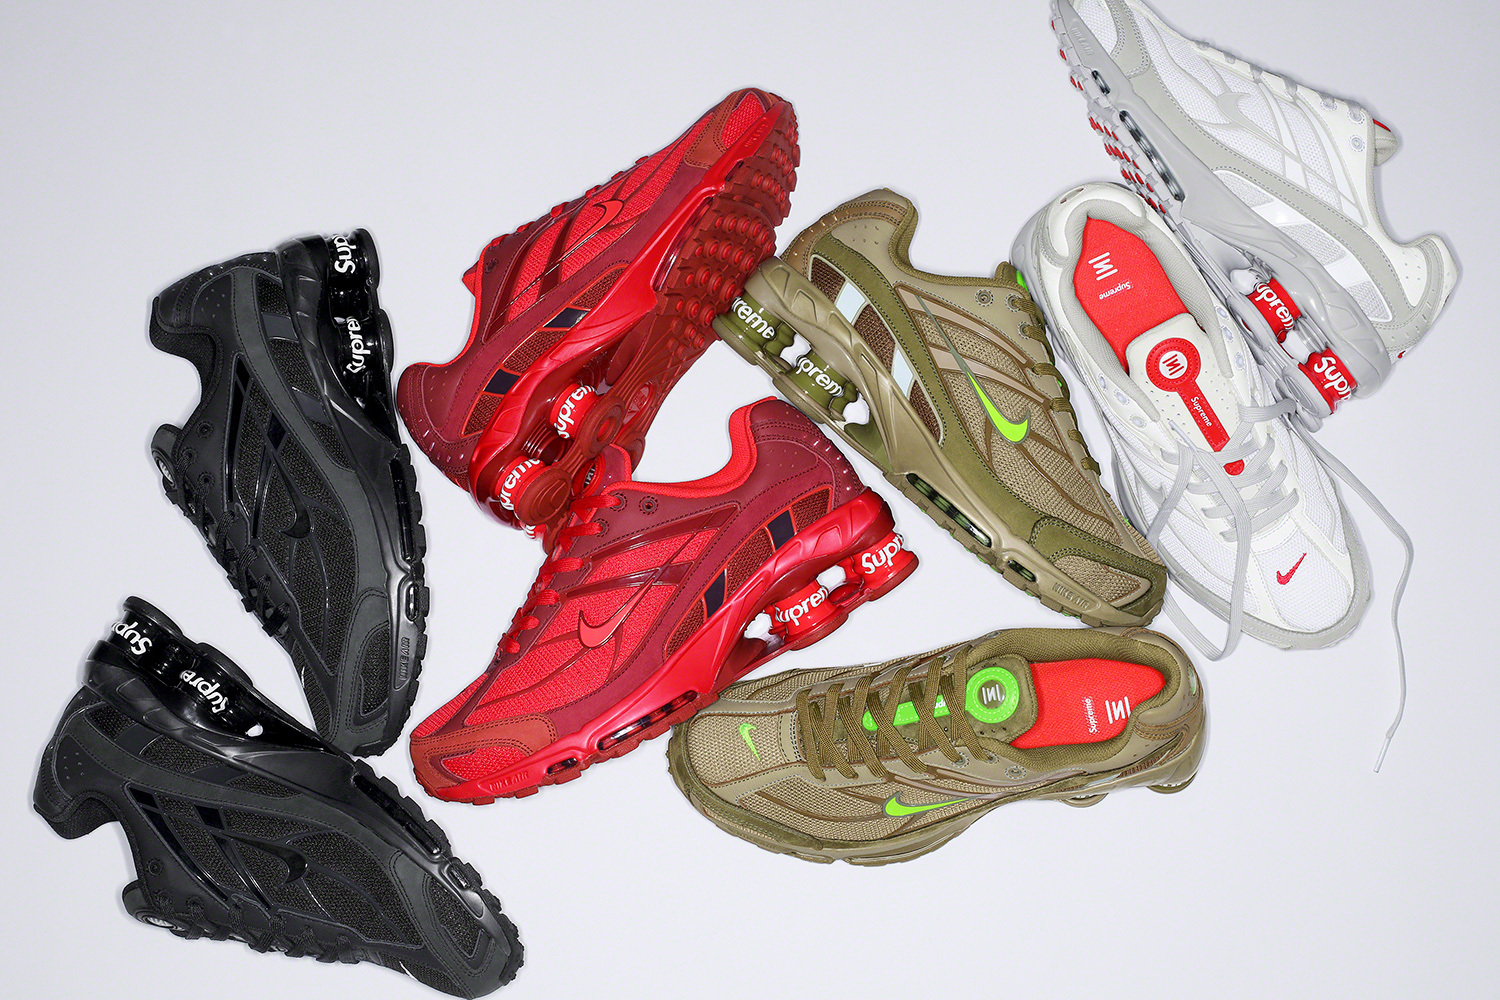 Ranking All Supreme's Nike Collaborations, From Worst to Best Complex